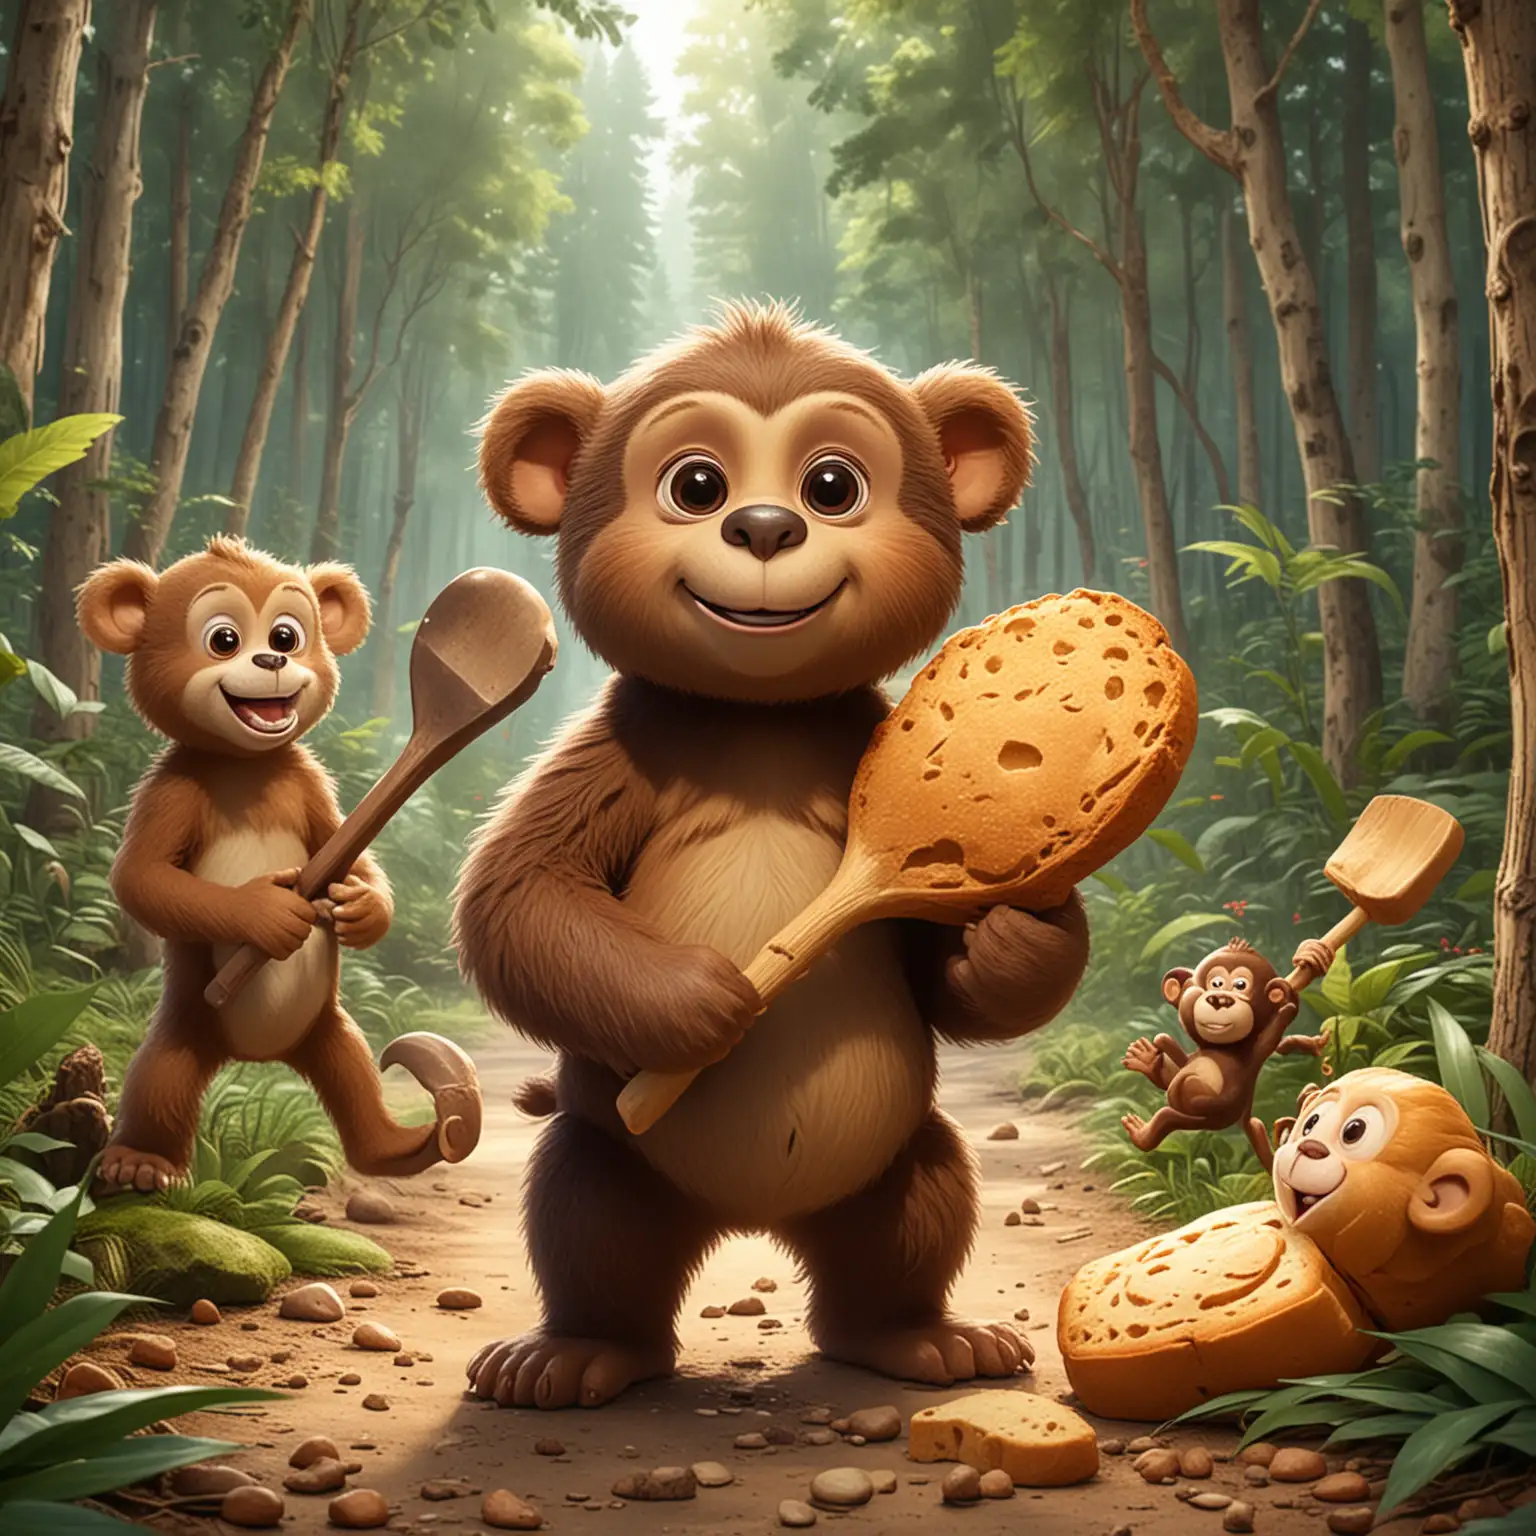 Playful-Cartoon-Bear-and-Monkey-with-Shovel-and-Bread-in-Forest